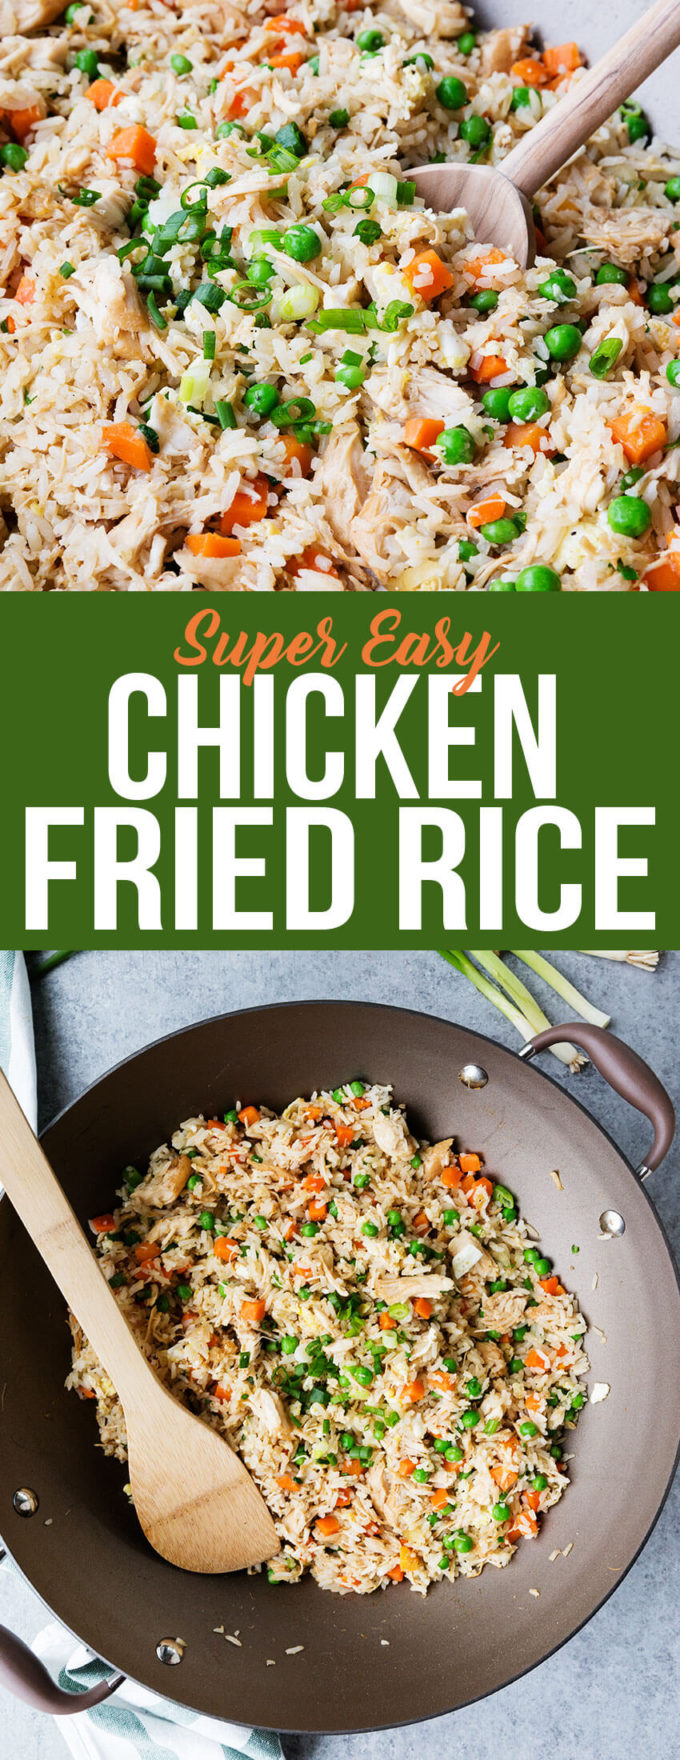 Super easy chicken fried rice, an excellent fried rice that is super simple but bursting with flavor